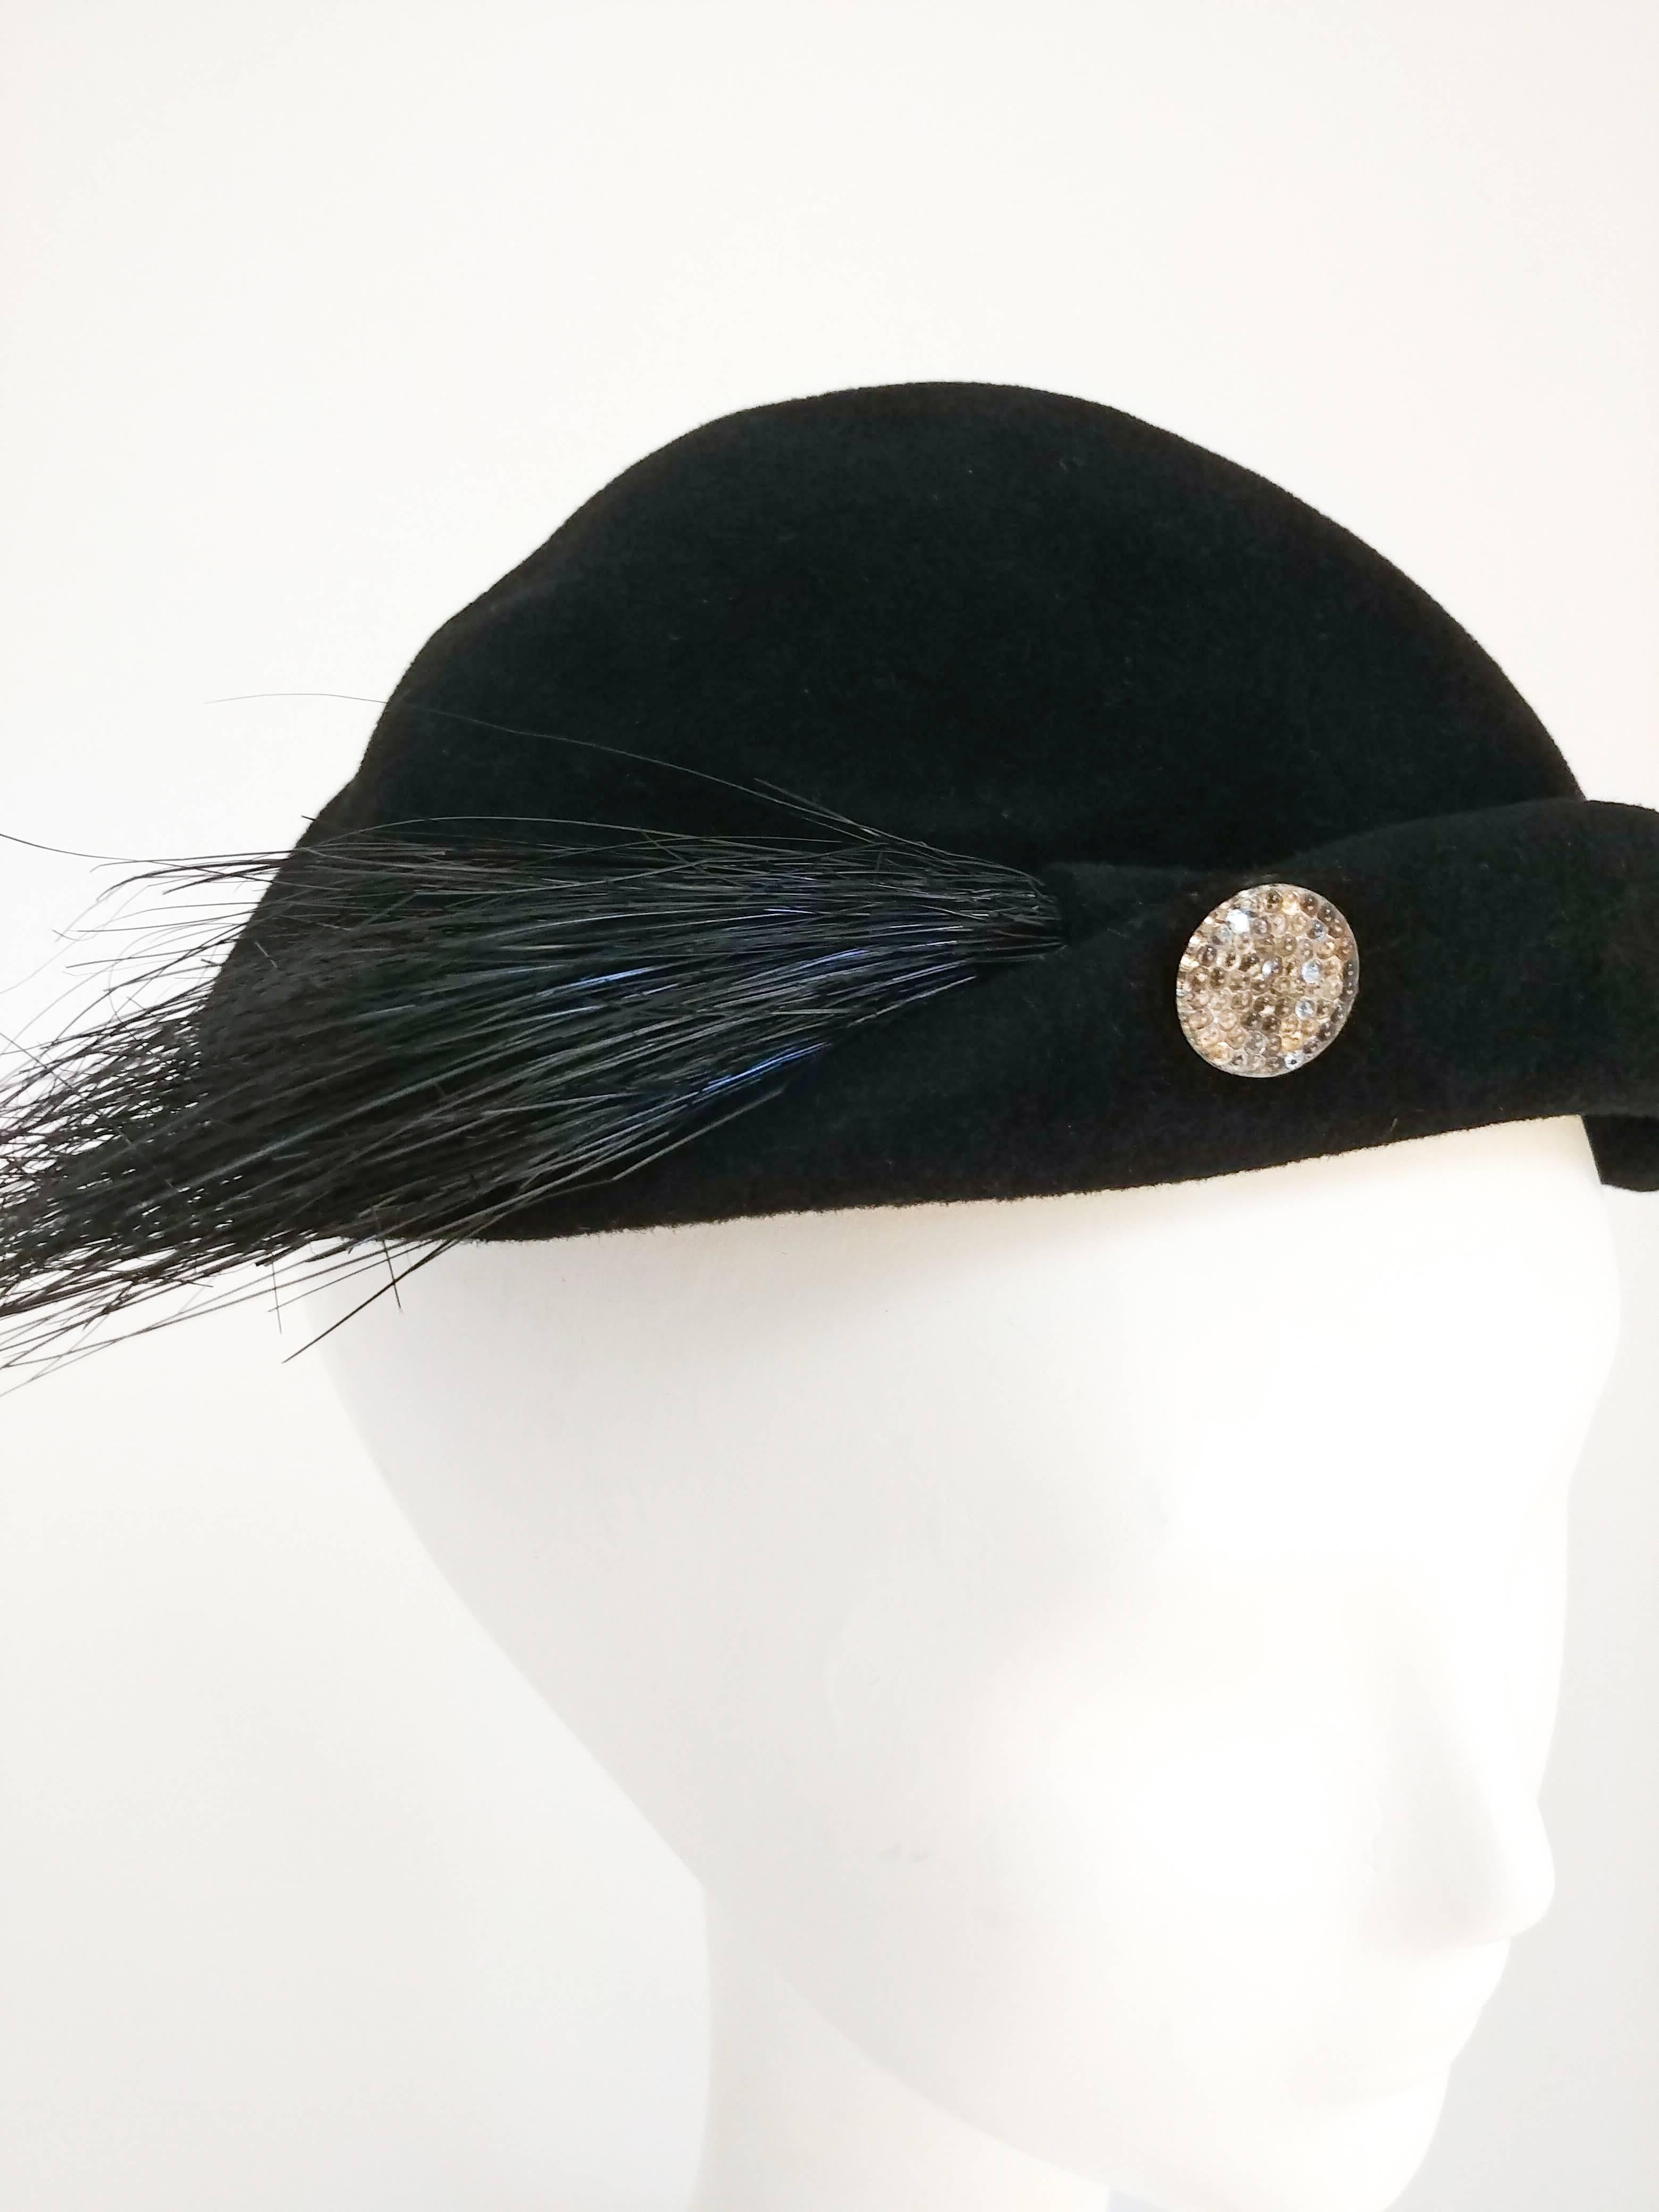 1930s Black Wool Hat w/ Horsehair Embellishment. Rhinestone button decorates brim and a spray of horsehair at side. Fur velour. 